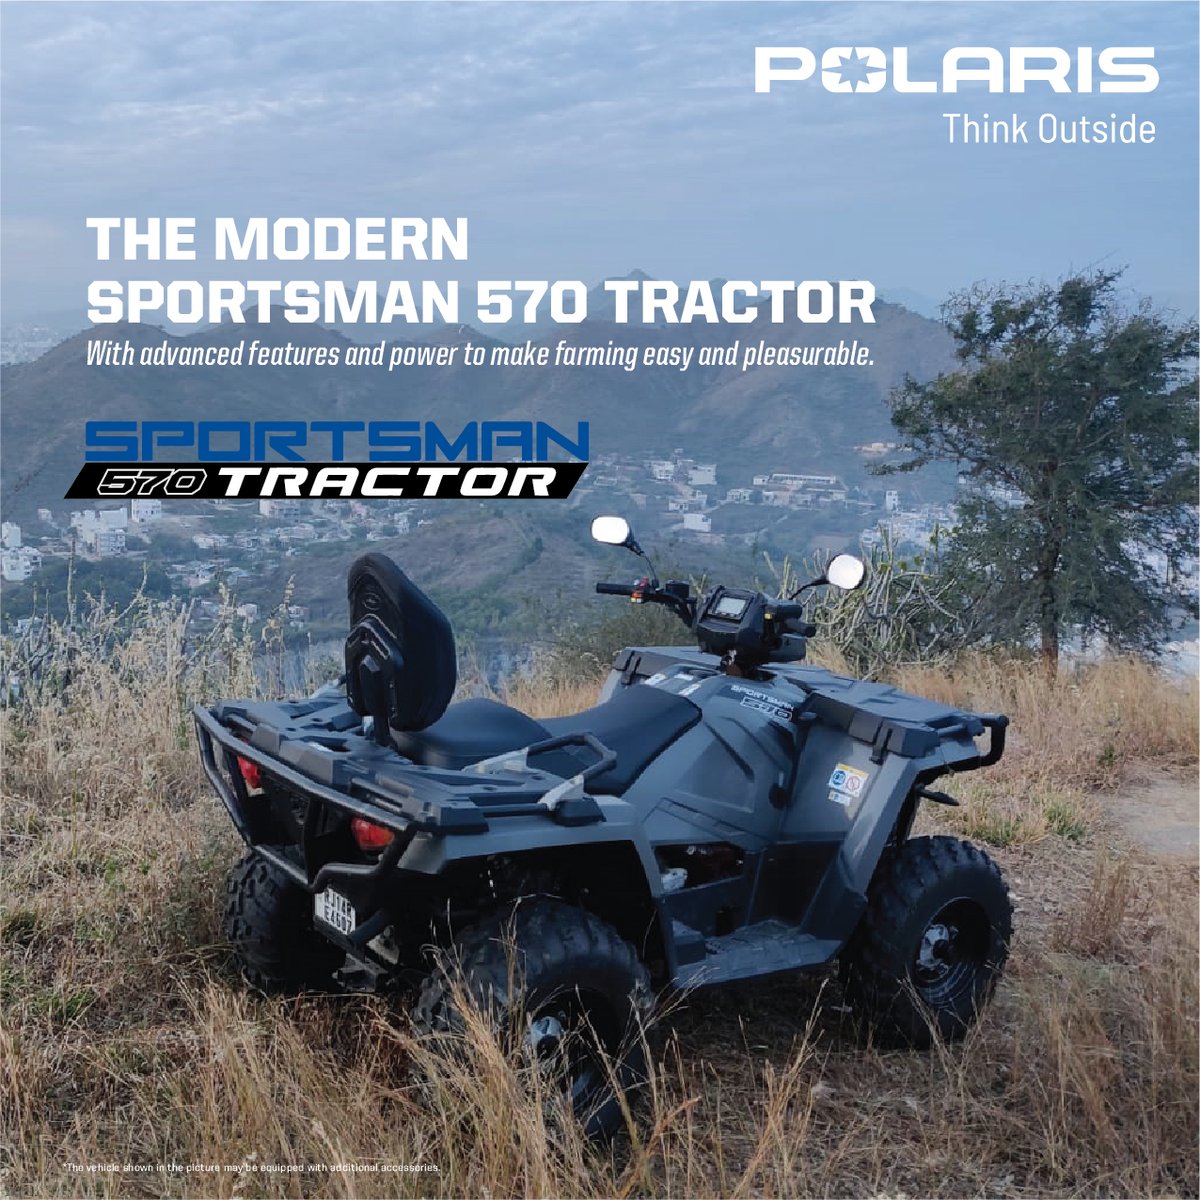 Polaris Sportsman 570 Tractor, makes every challenge and task easy to   overcome with its endless features packed in a compact design.
    -
    #Sportsman570Tractor
    #Polaris #PolarisIndia #Offroad #farmequipment #agriculture #polaristractor   #agricultureworld #smartfarming